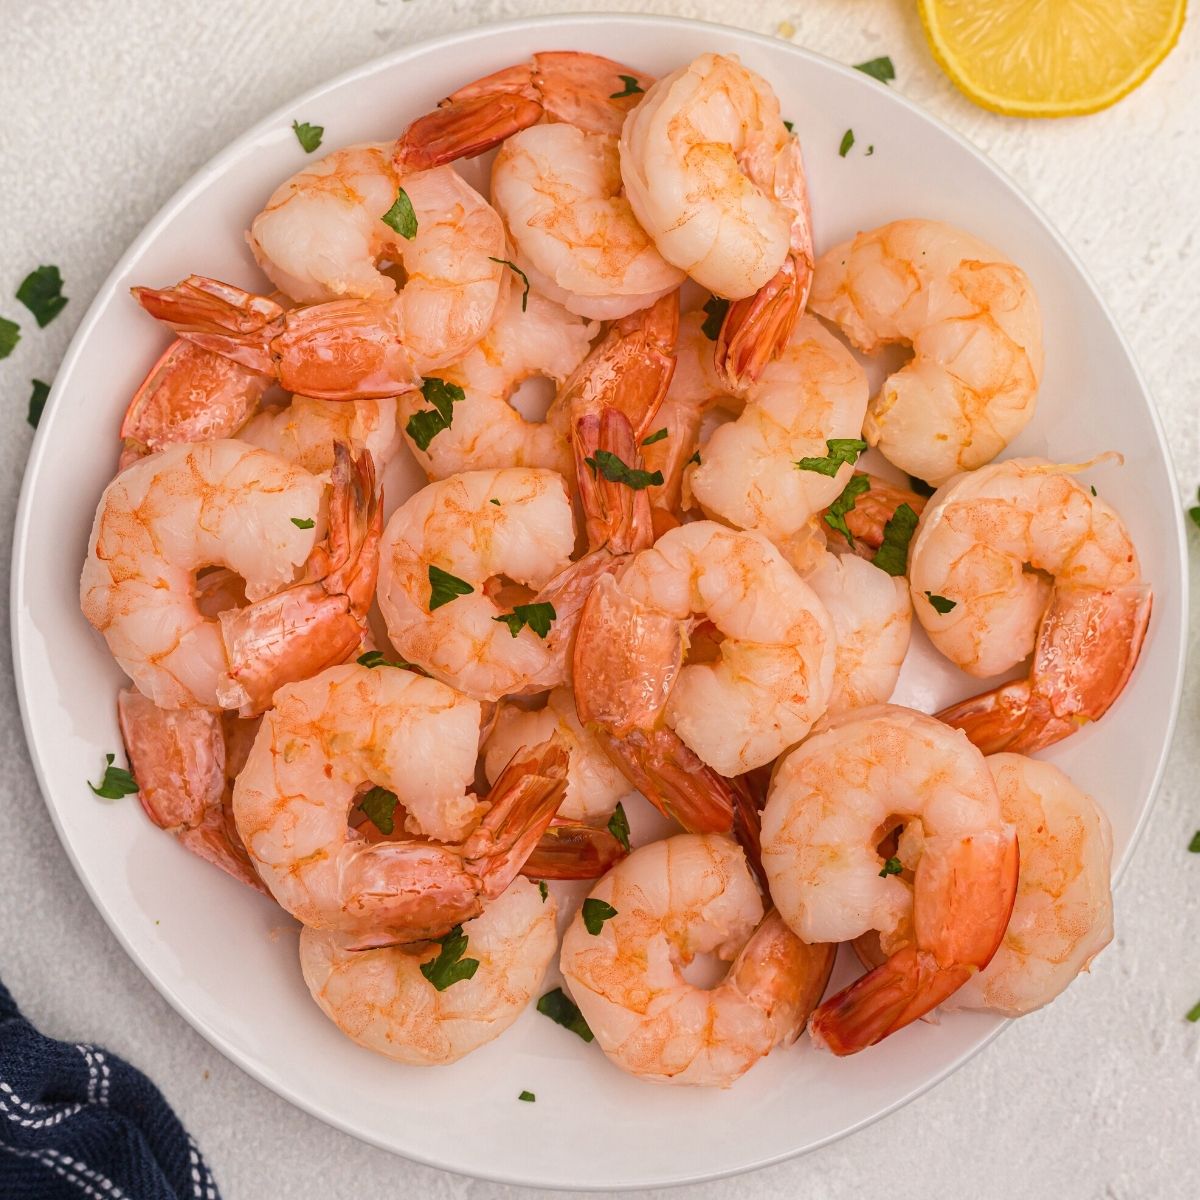 Juicy orange shrimp on a white plate, garnished with lemon slices and parsley flakes on a white plate.